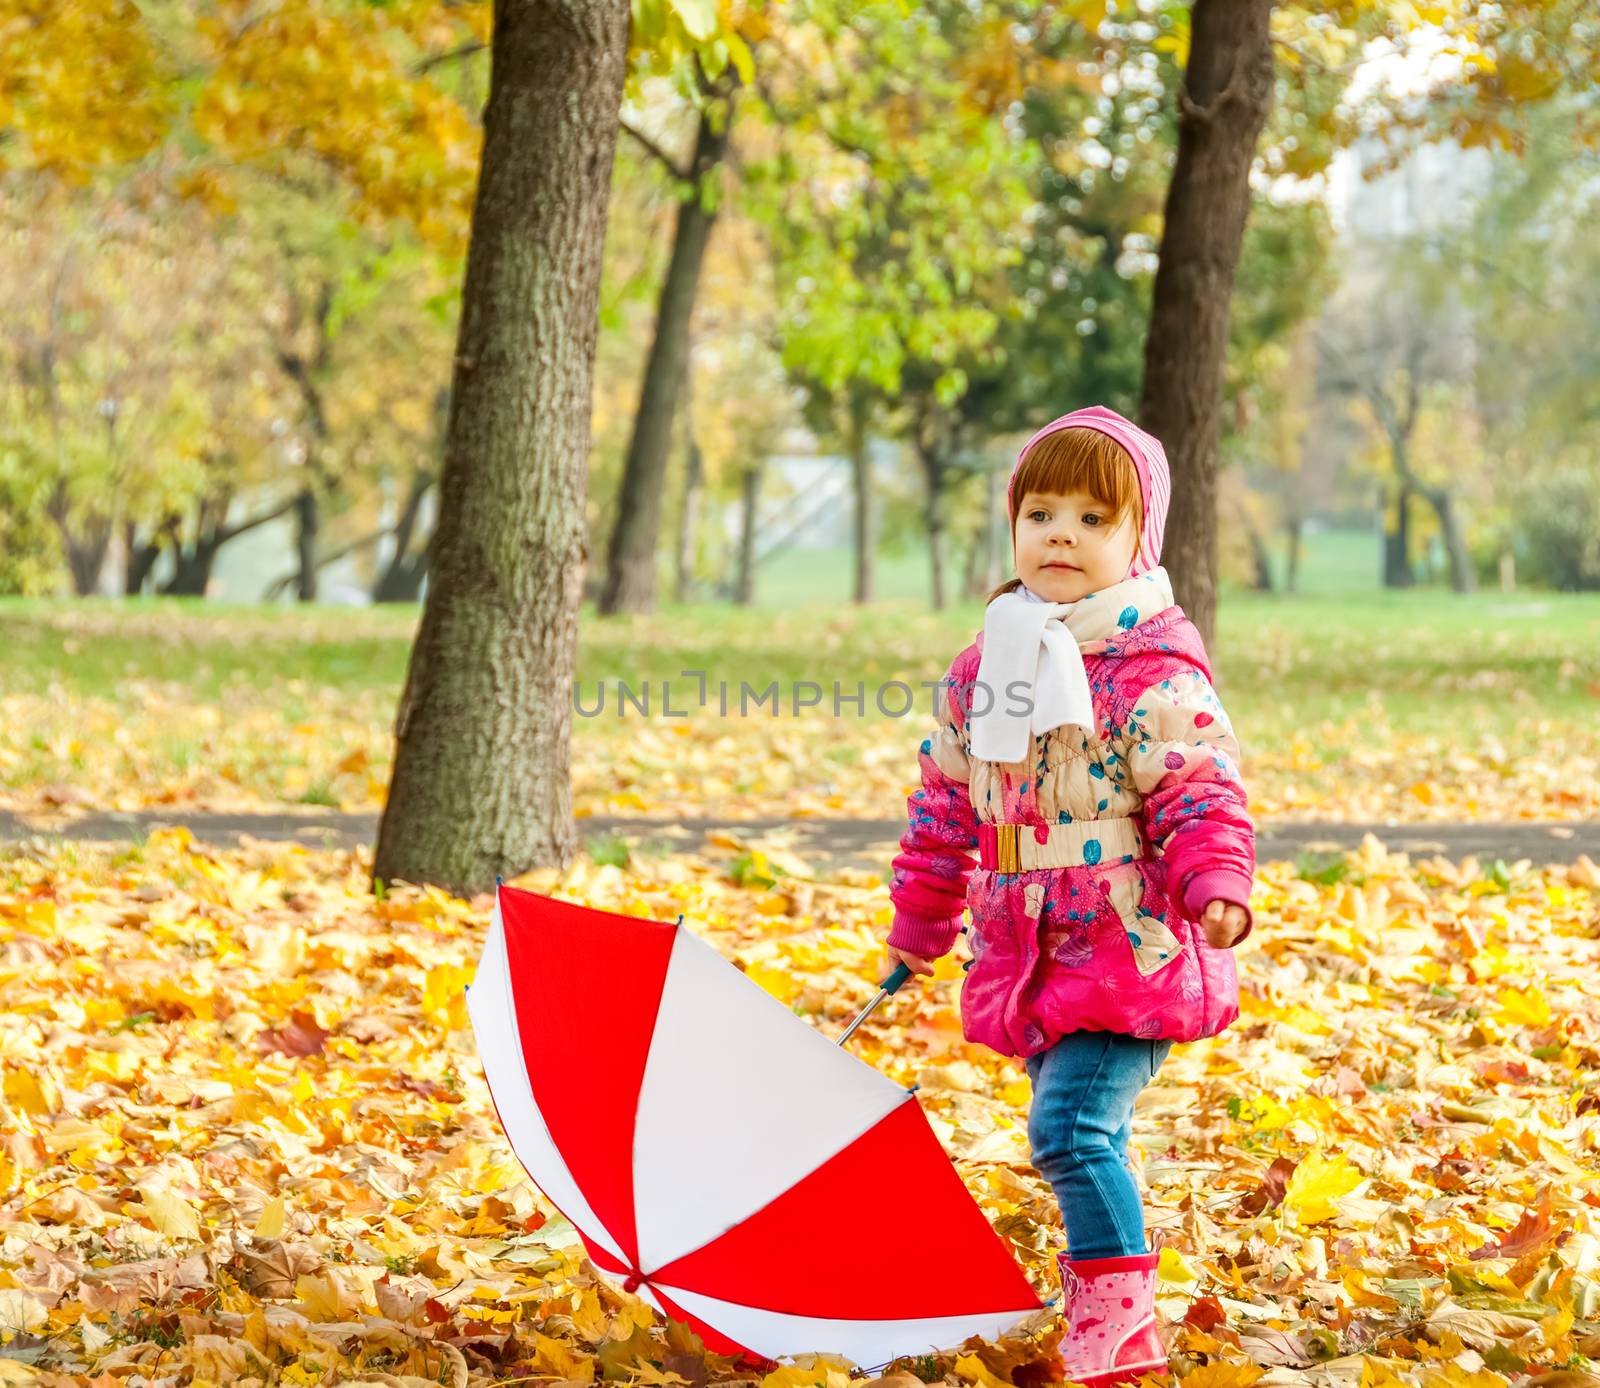 A little girl walking in the park with an umbrella